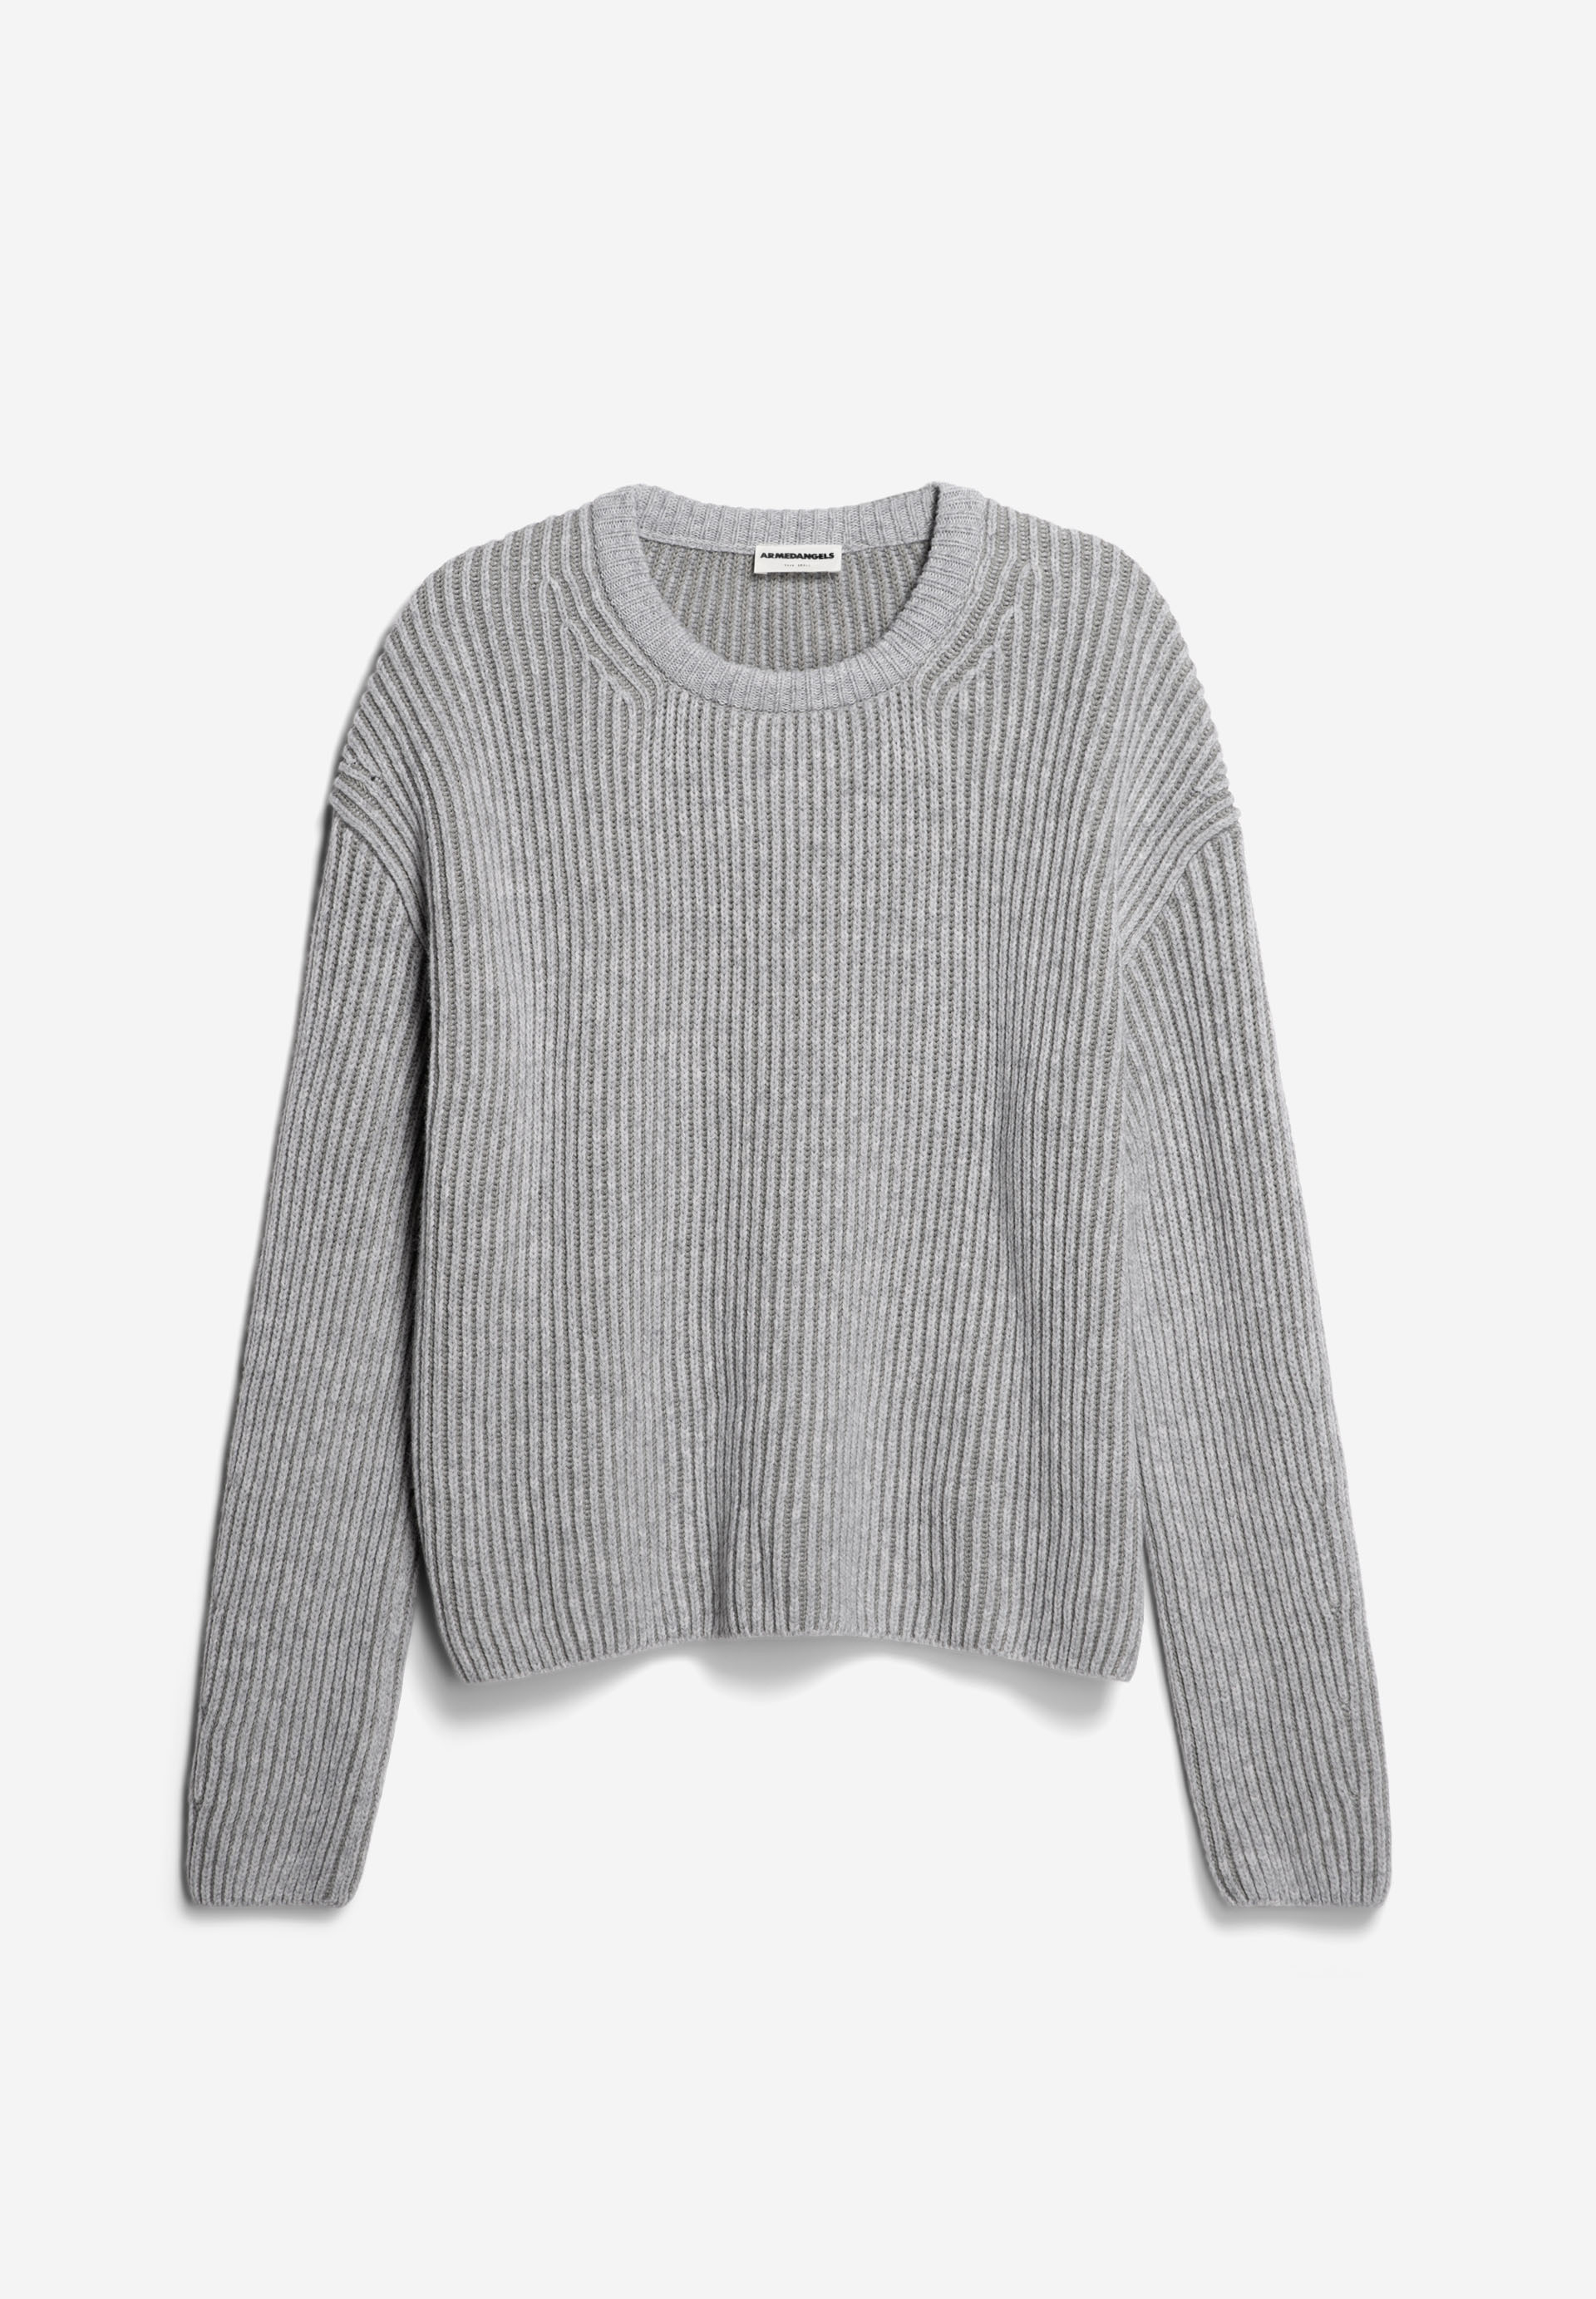 NAARUKO Knit Sweater Oversized Fit made of Organic Cotton Mix